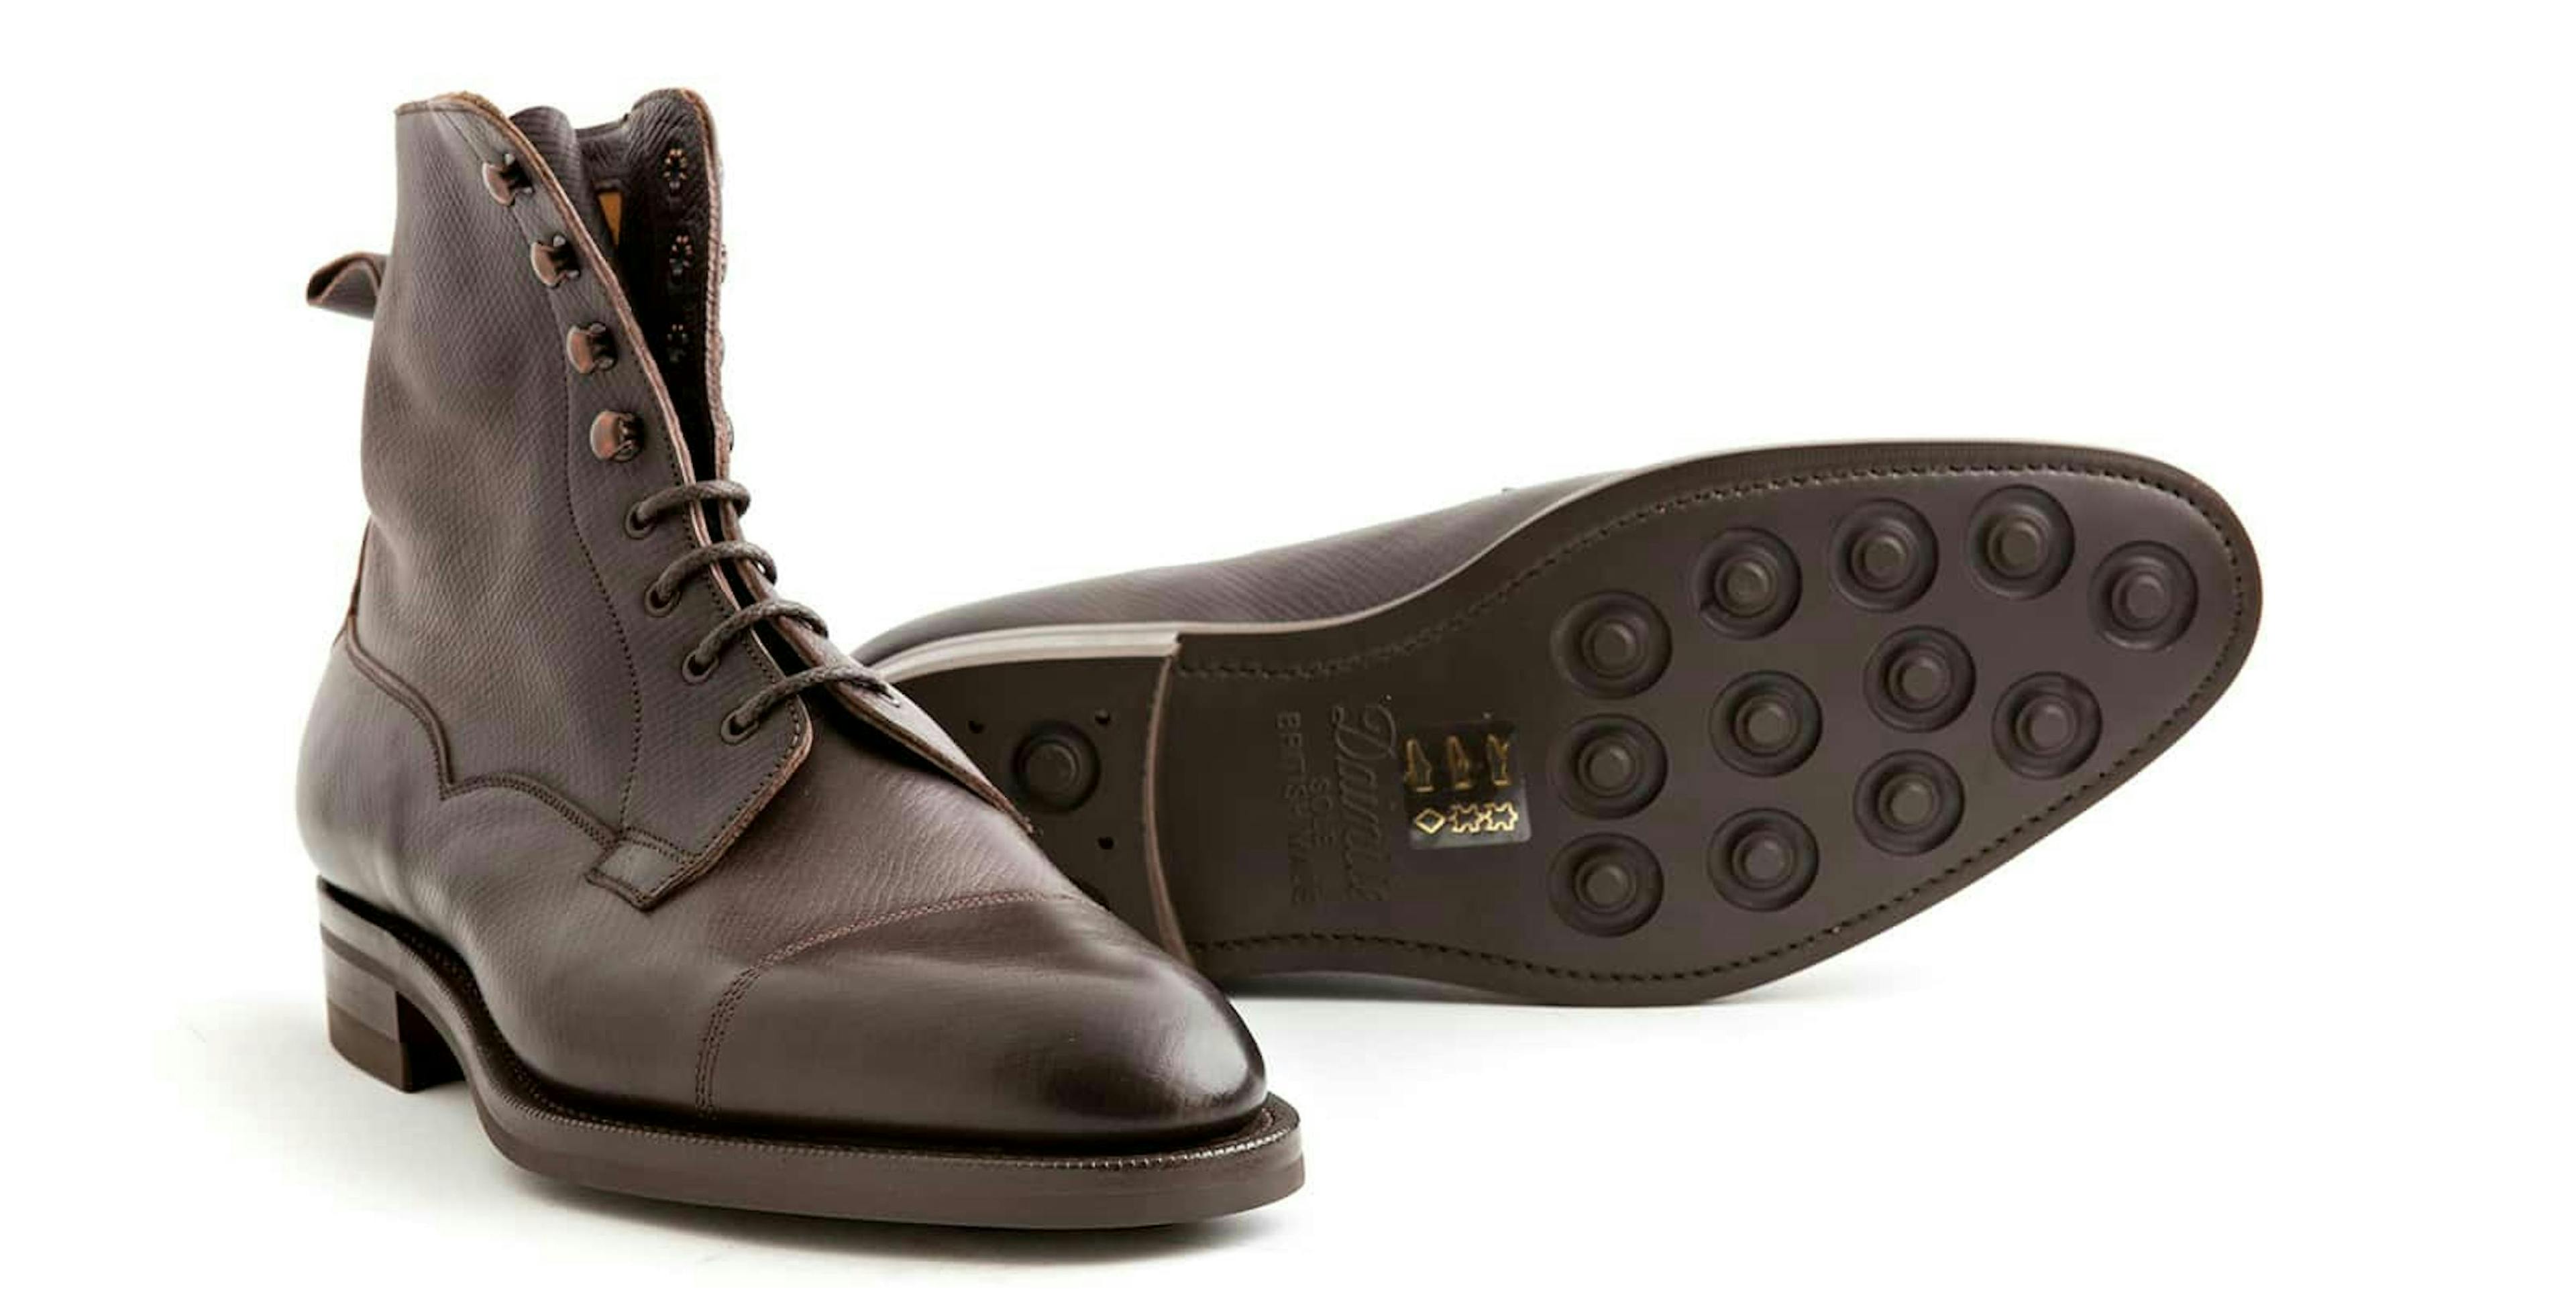 An Edward Green Galway in dark brown utah, with a view of its dainite soles.